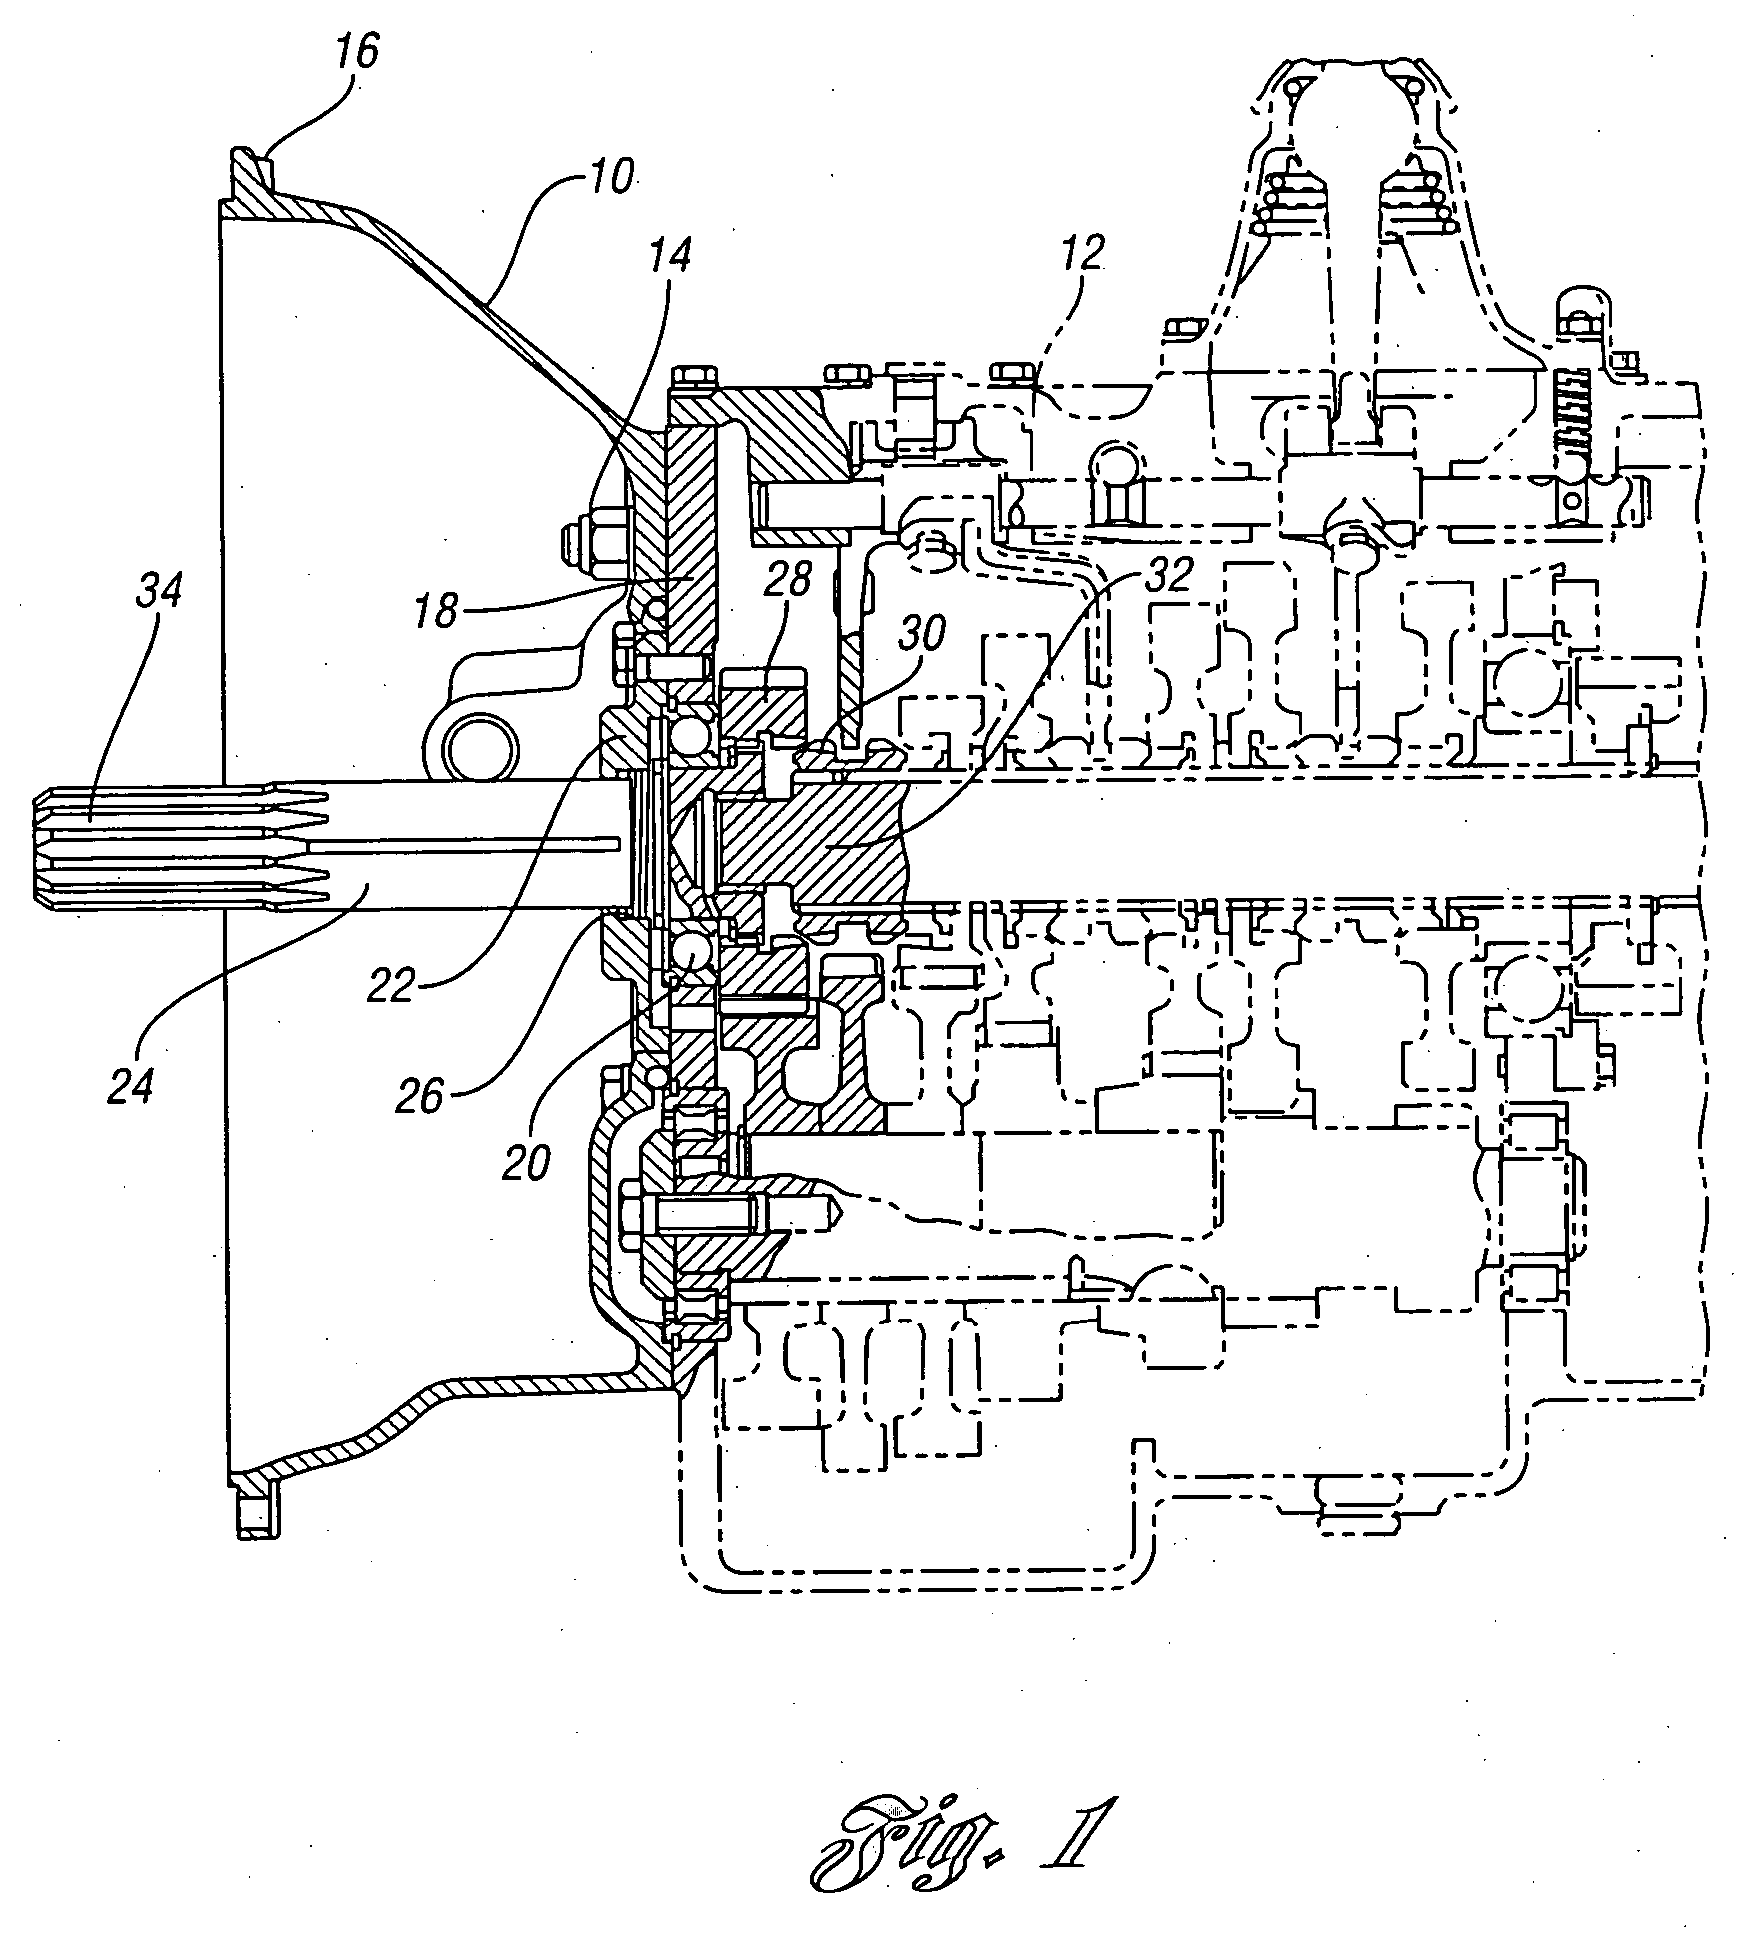 Electromagnetic brake for a multiple-ratio power transmission in a vehicle powertrain